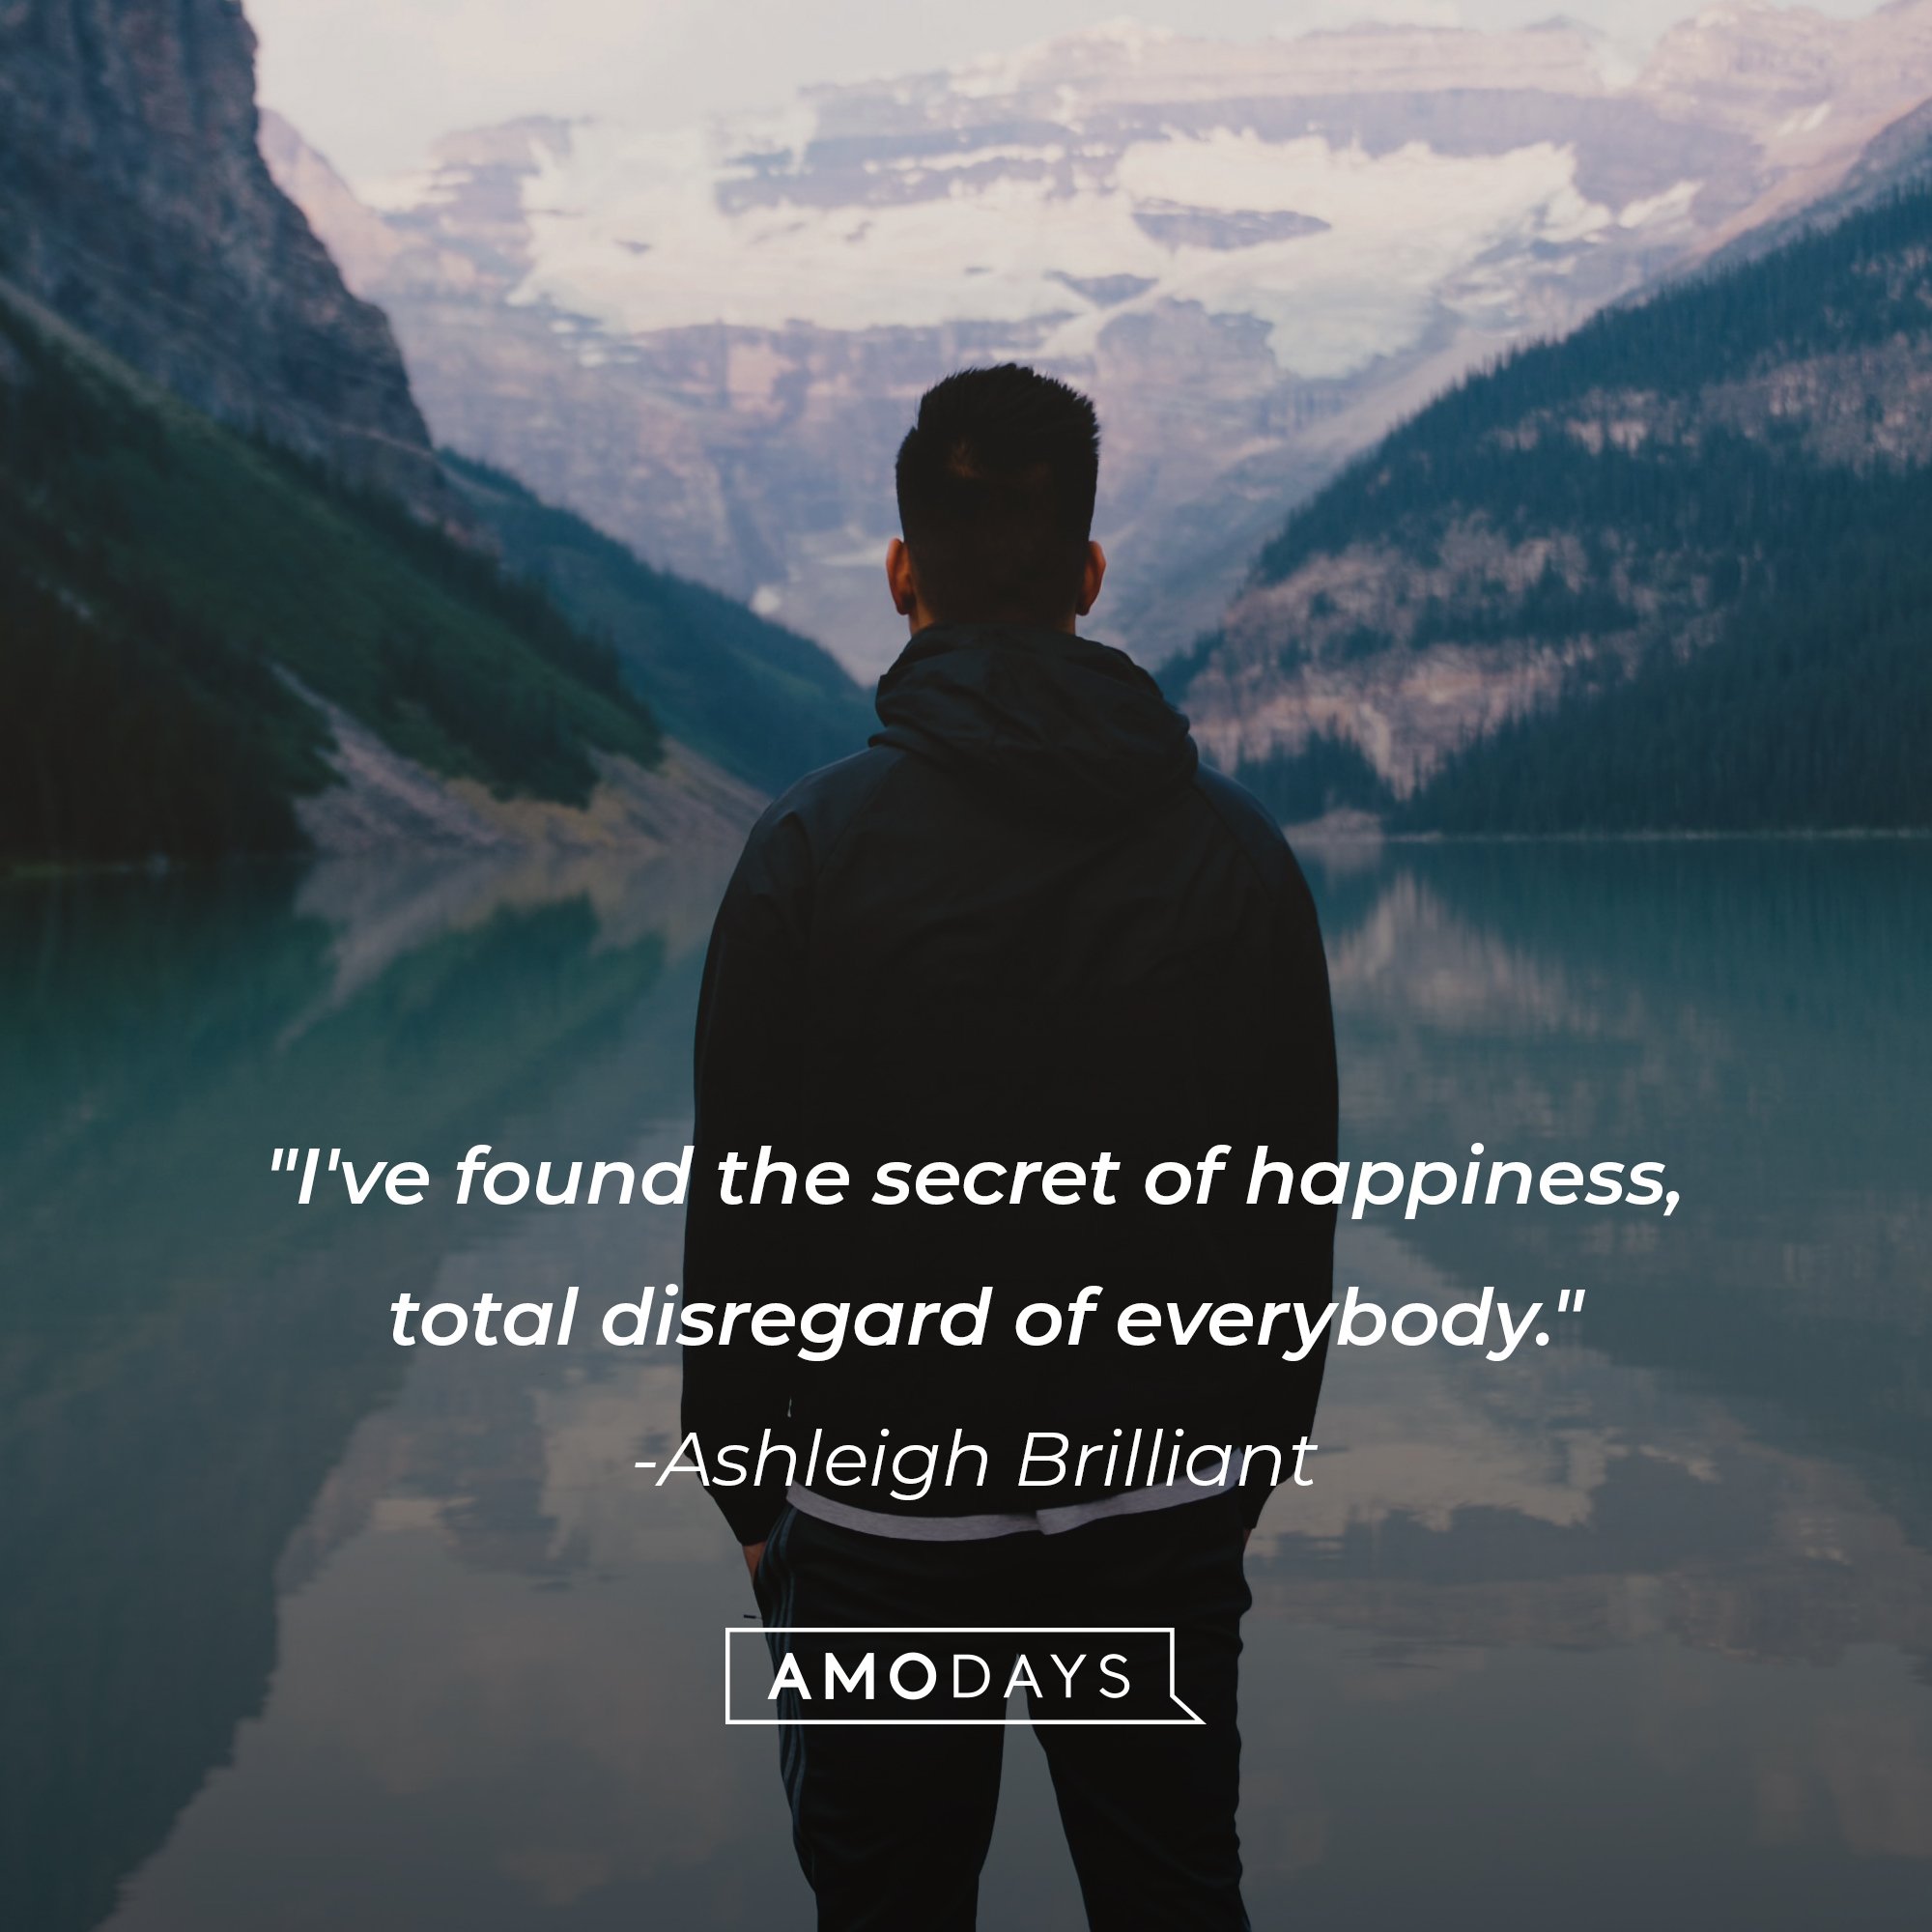 Ashleigh Brilliant's quote: "I've found the secret of happiness, total disregard of everybody." | Image: AmoDays